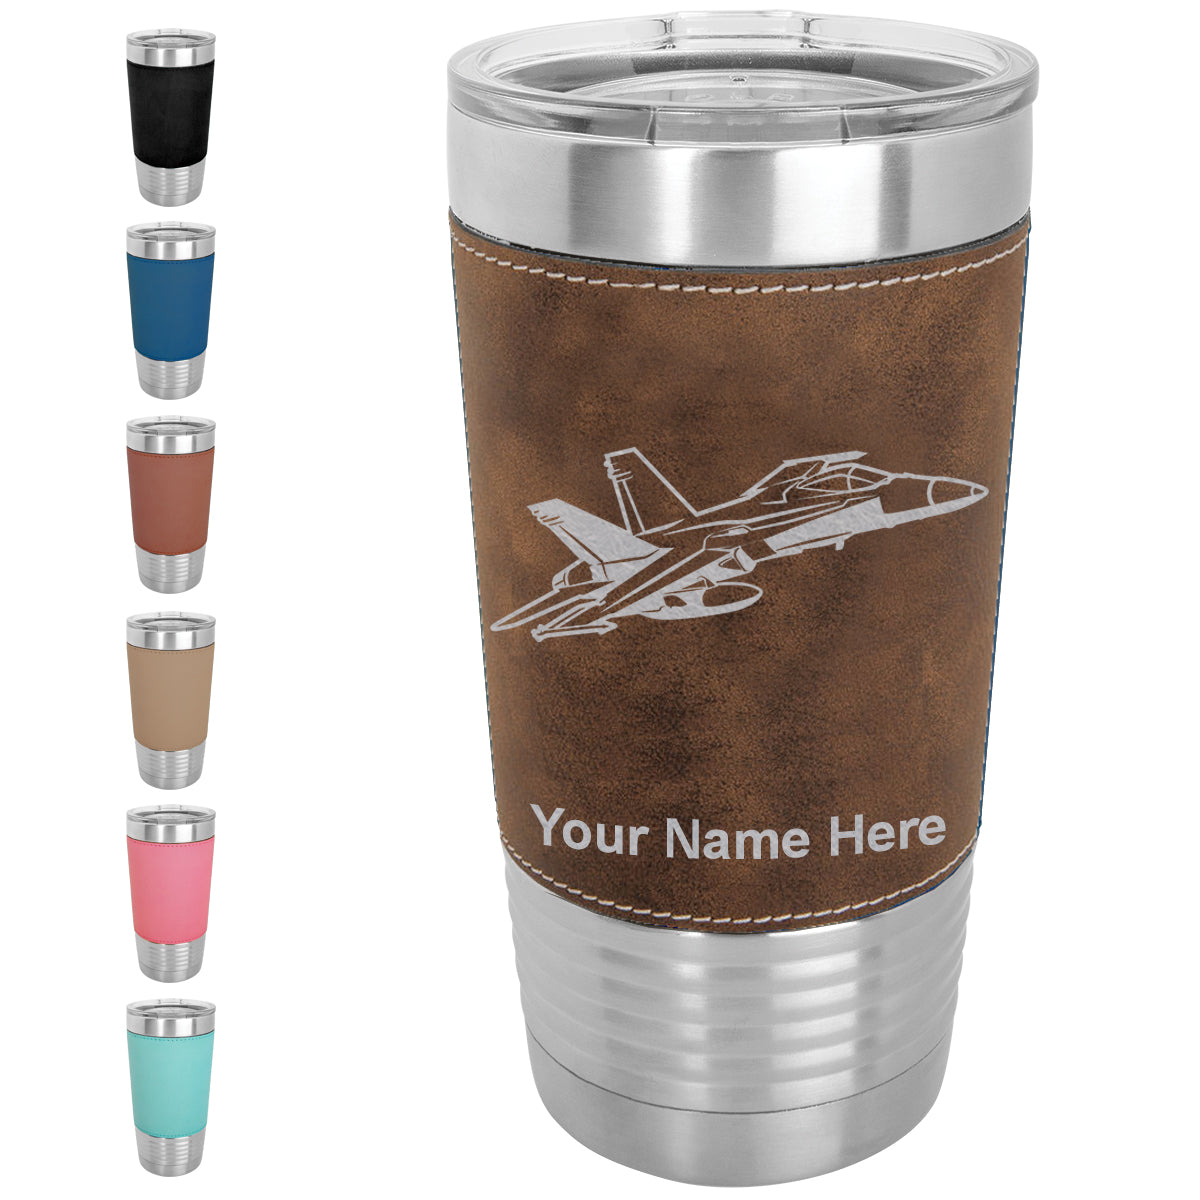 20oz Faux Leather Tumbler Mug, Fighter Jet 2, Personalized Engraving Included - LaserGram Custom Engraved Gifts